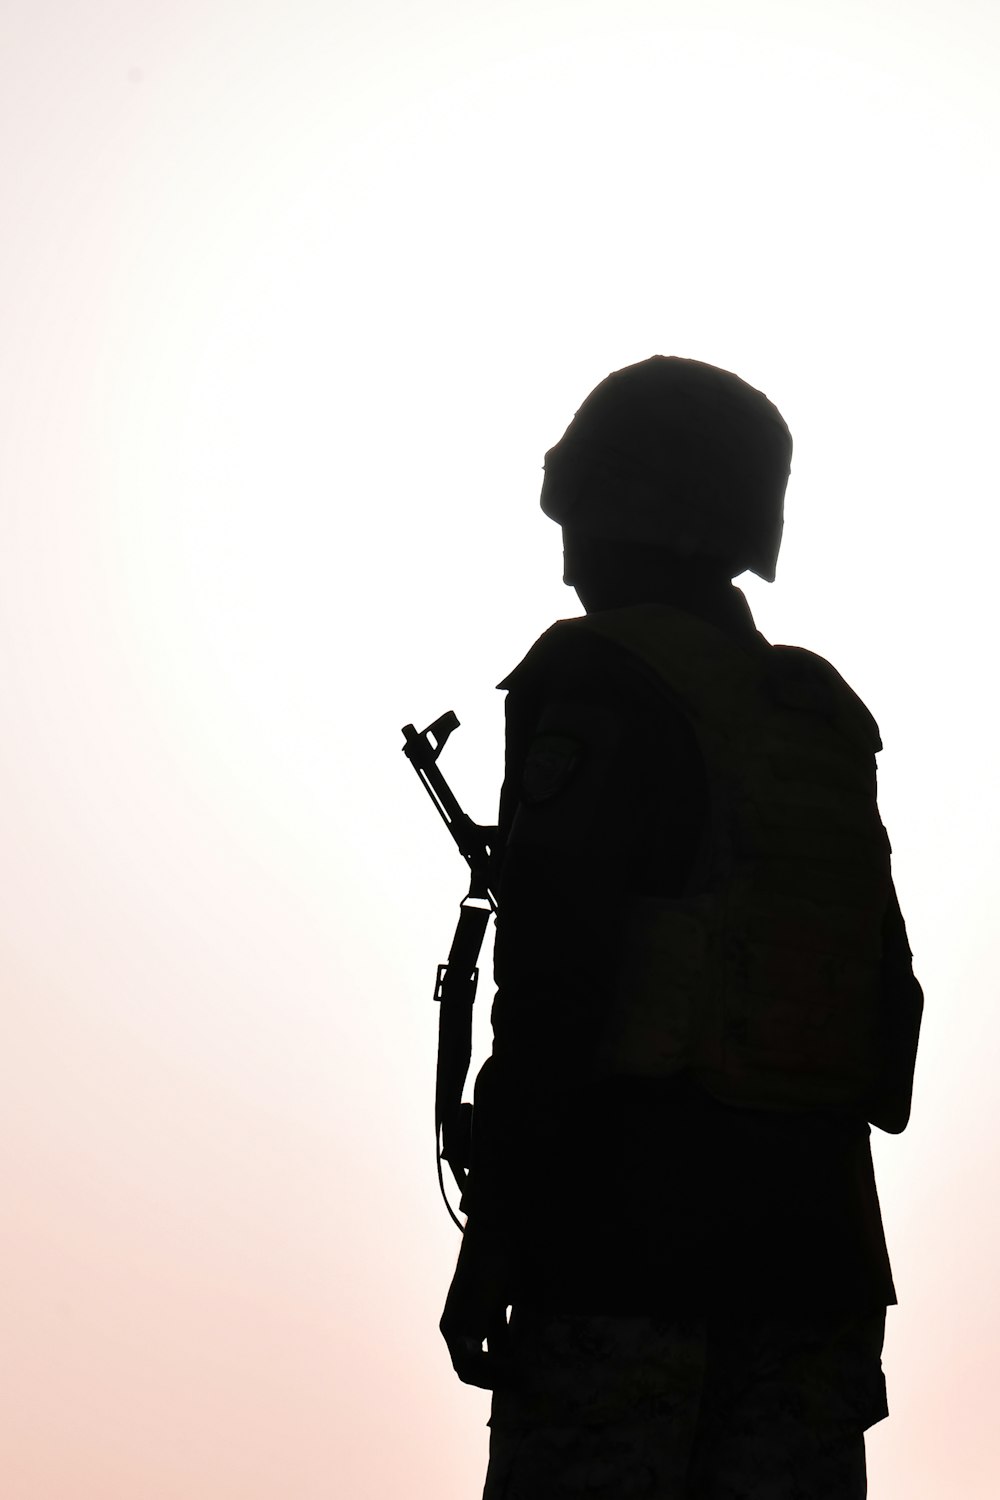 a silhouette of a soldier holding a rifle